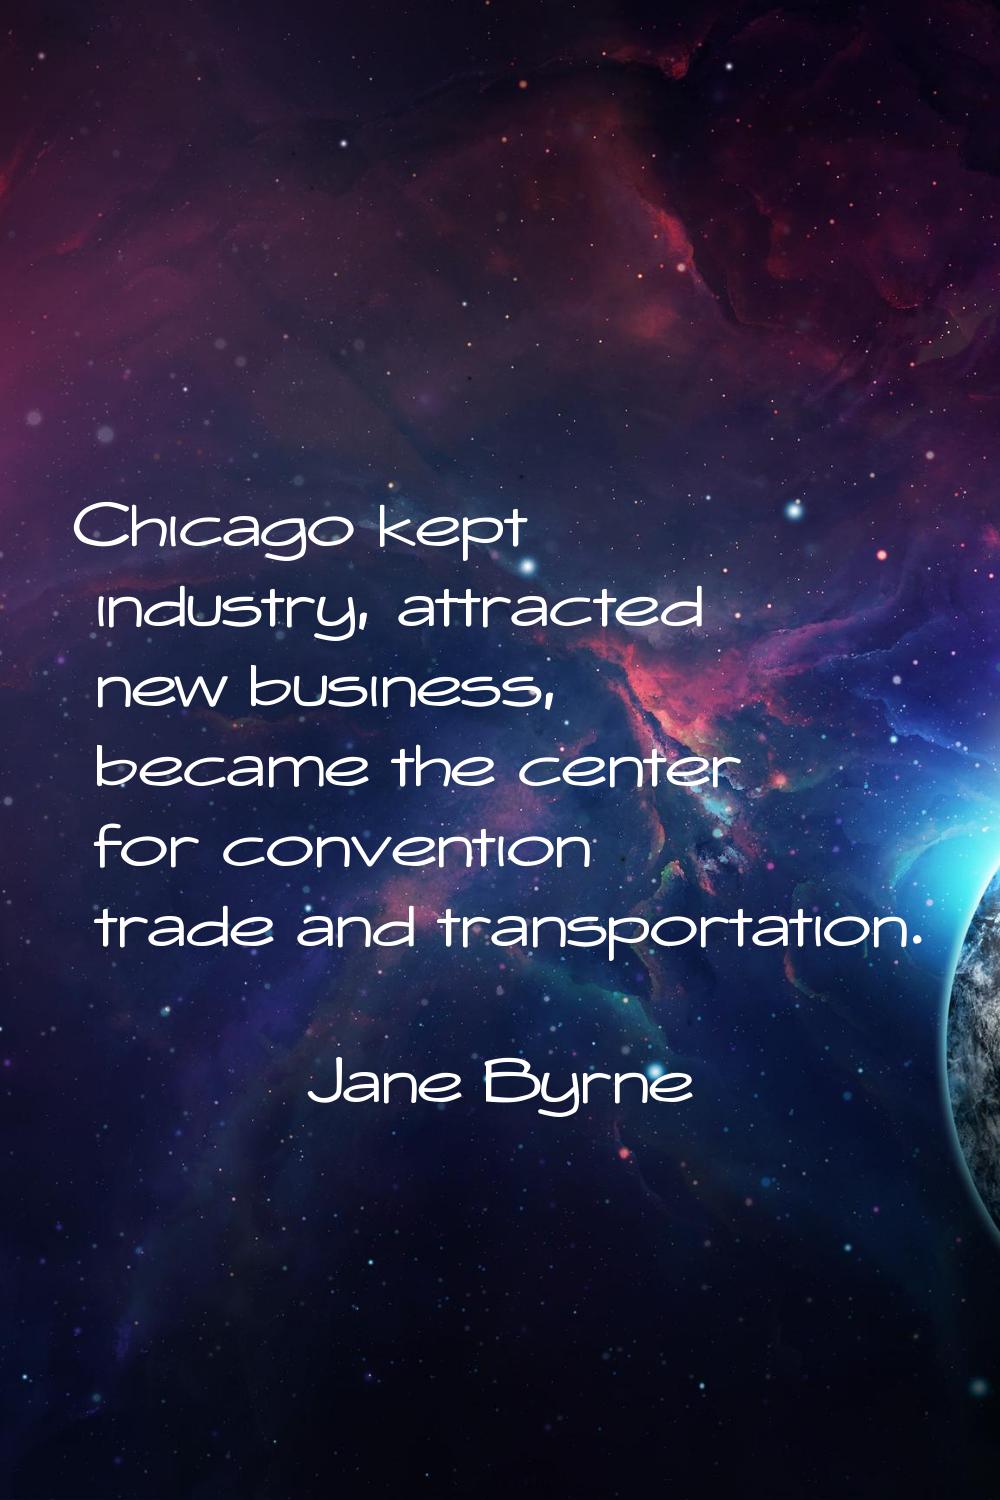 Chicago kept industry, attracted new business, became the center for convention trade and transport